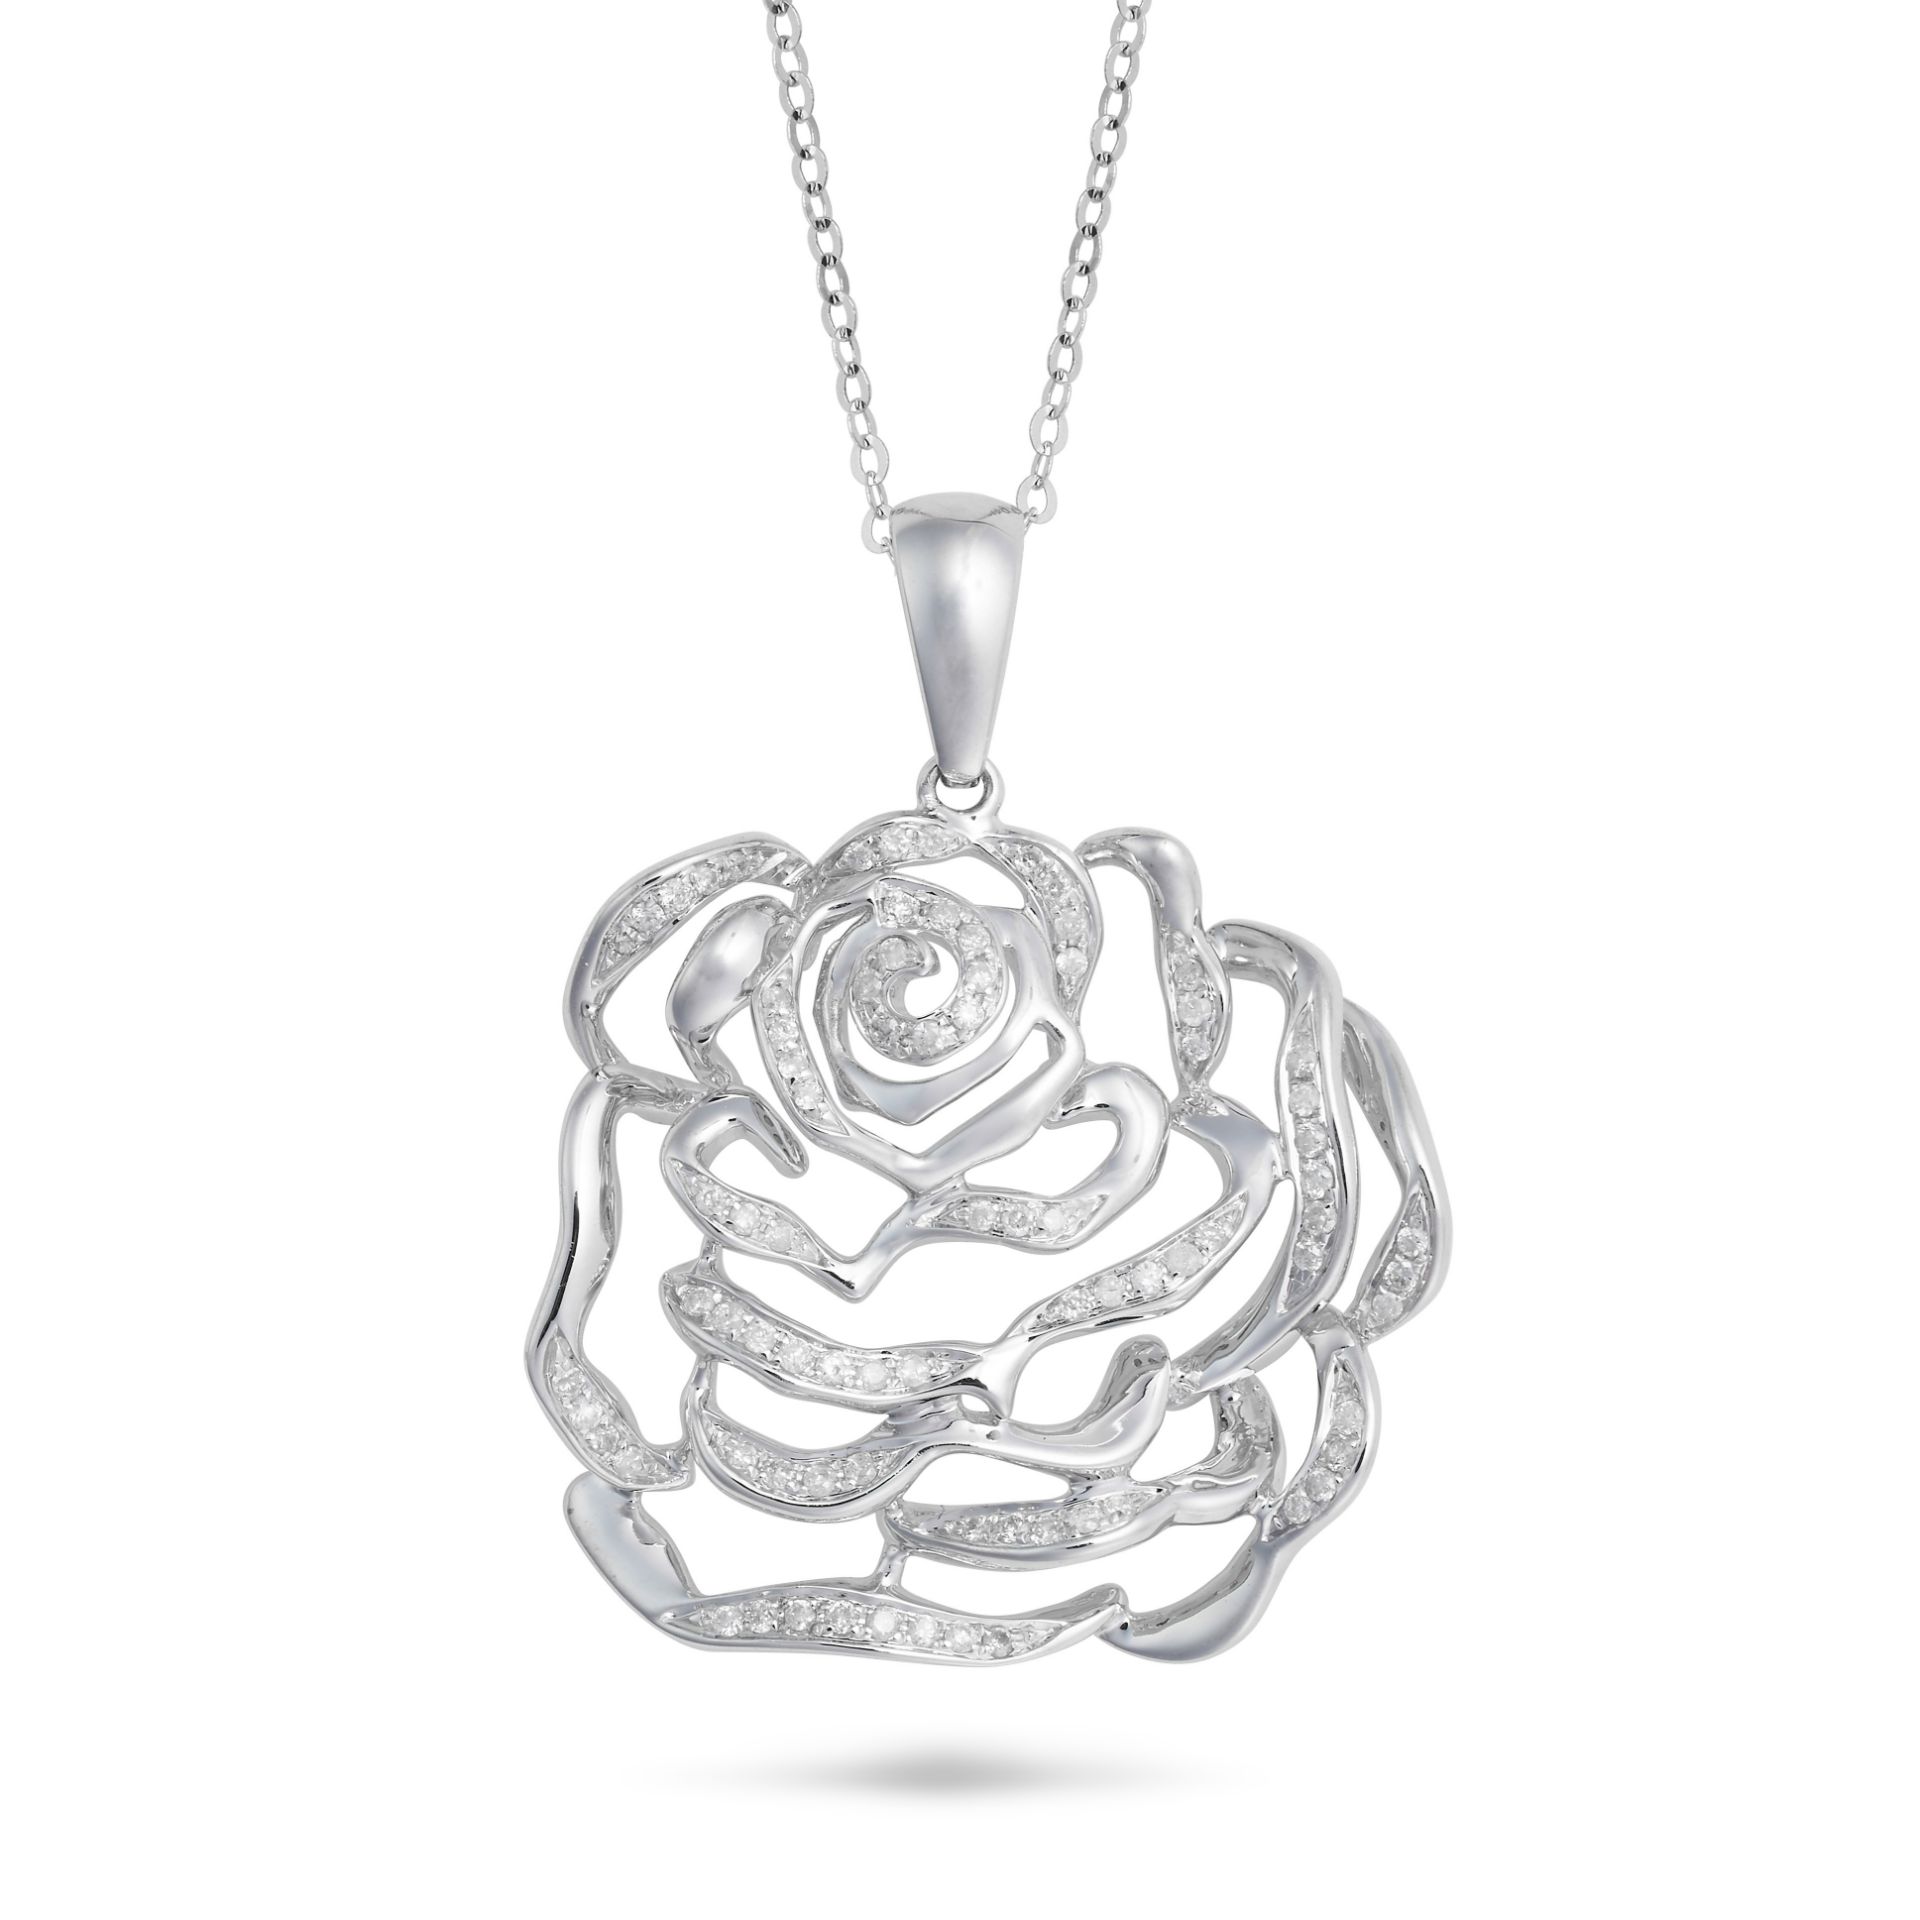 A DIAMOND ROSE PENDANT NECKLACE the pendant designed as an openwork rose accented by round cut di...